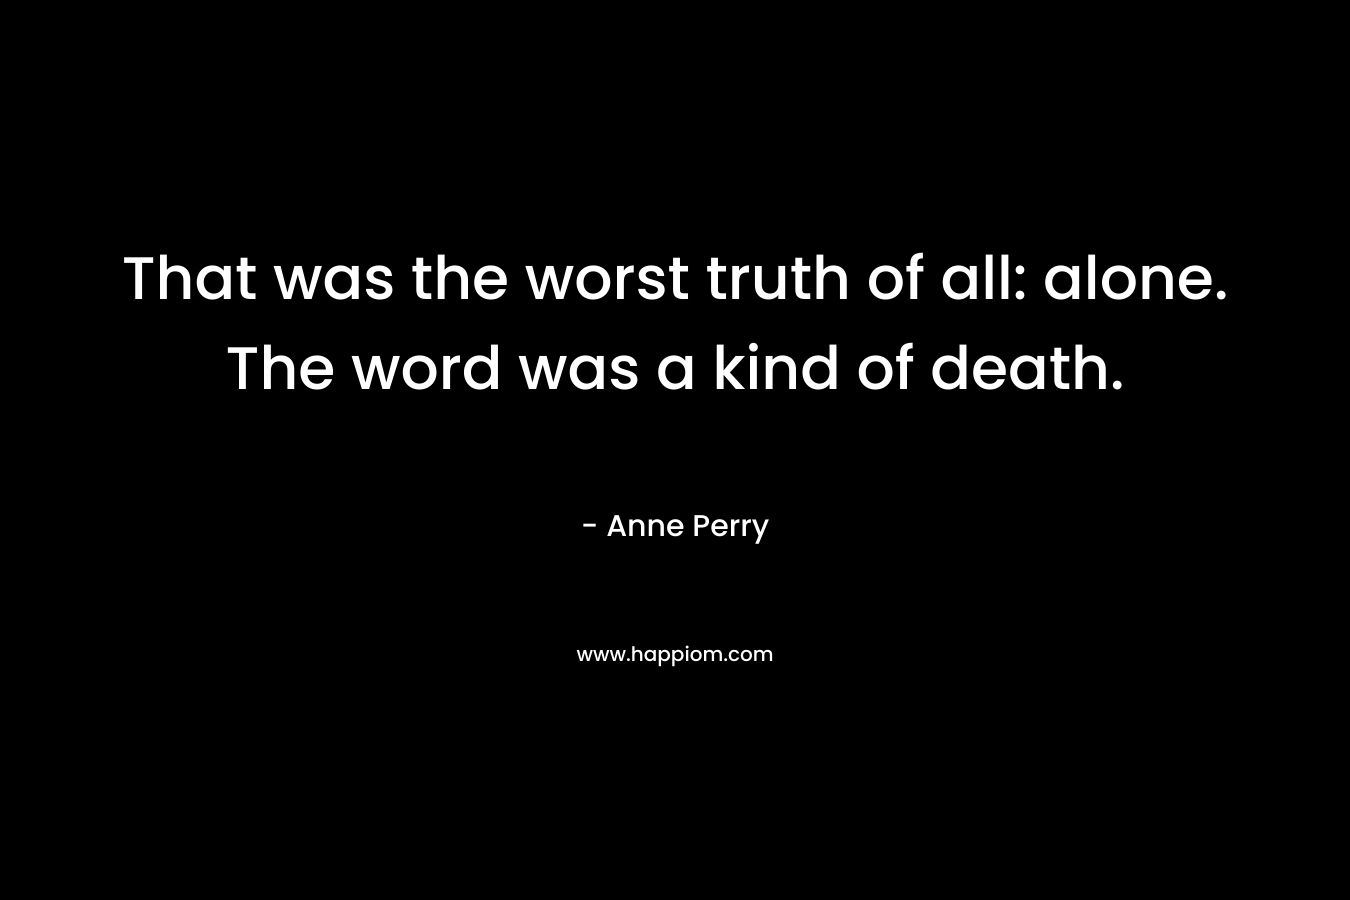 That was the worst truth of all: alone. The word was a kind of death. – Anne Perry